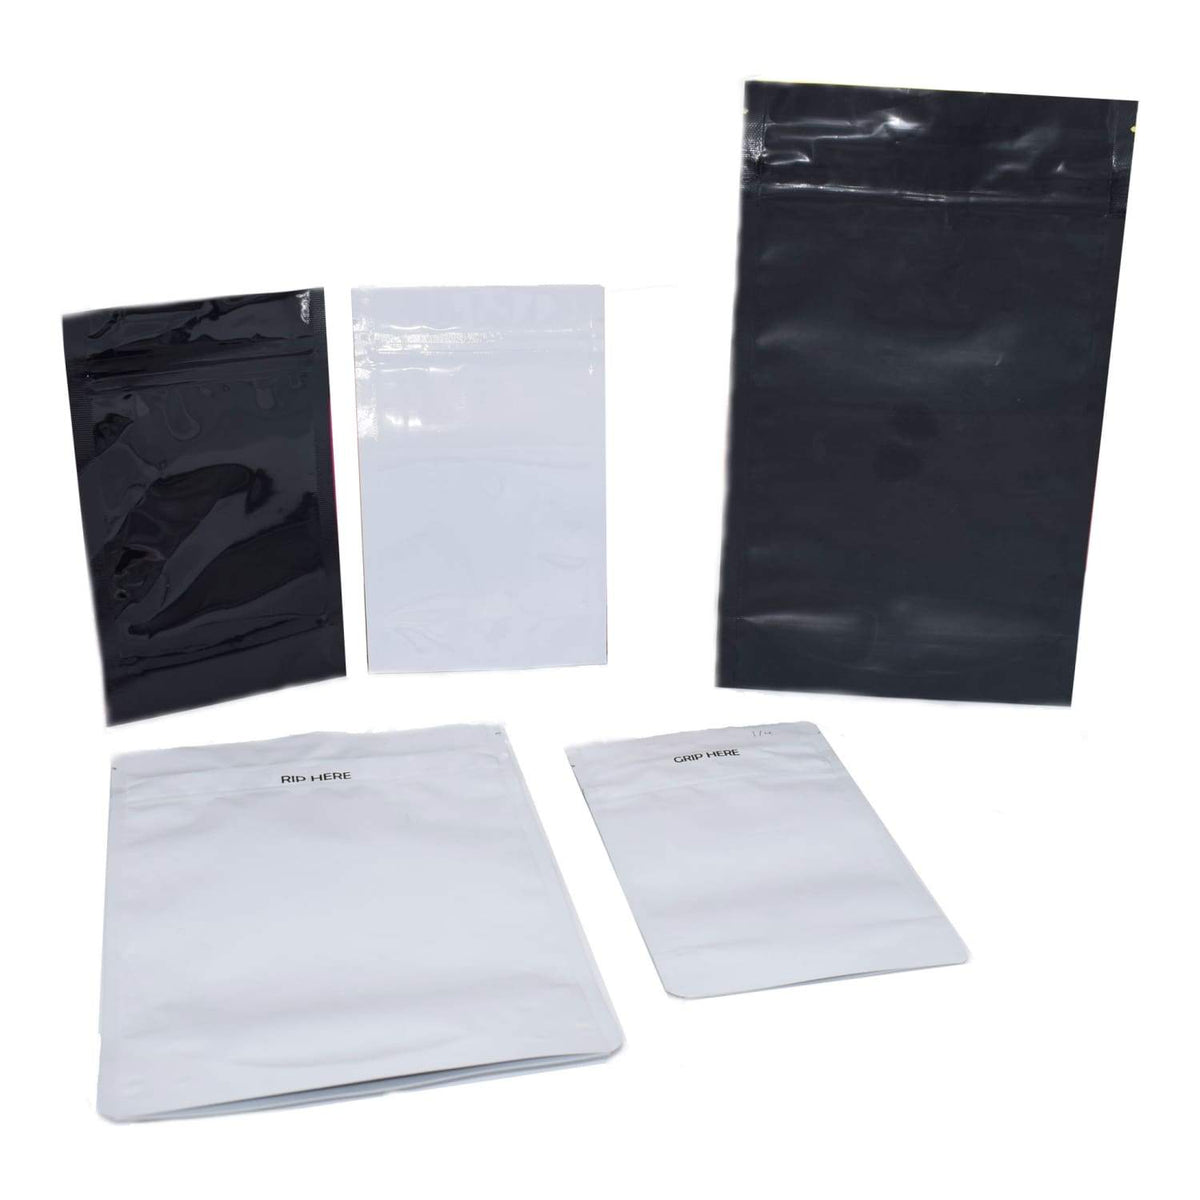 Custom Printed Reusable Plastic Heat Seal Mini Ziplock Baggies Stand up  Pouch 3.5 G Resealable Smell Proof Mylar Bags - China Ziplock Bag, Exit  Plastic Bag